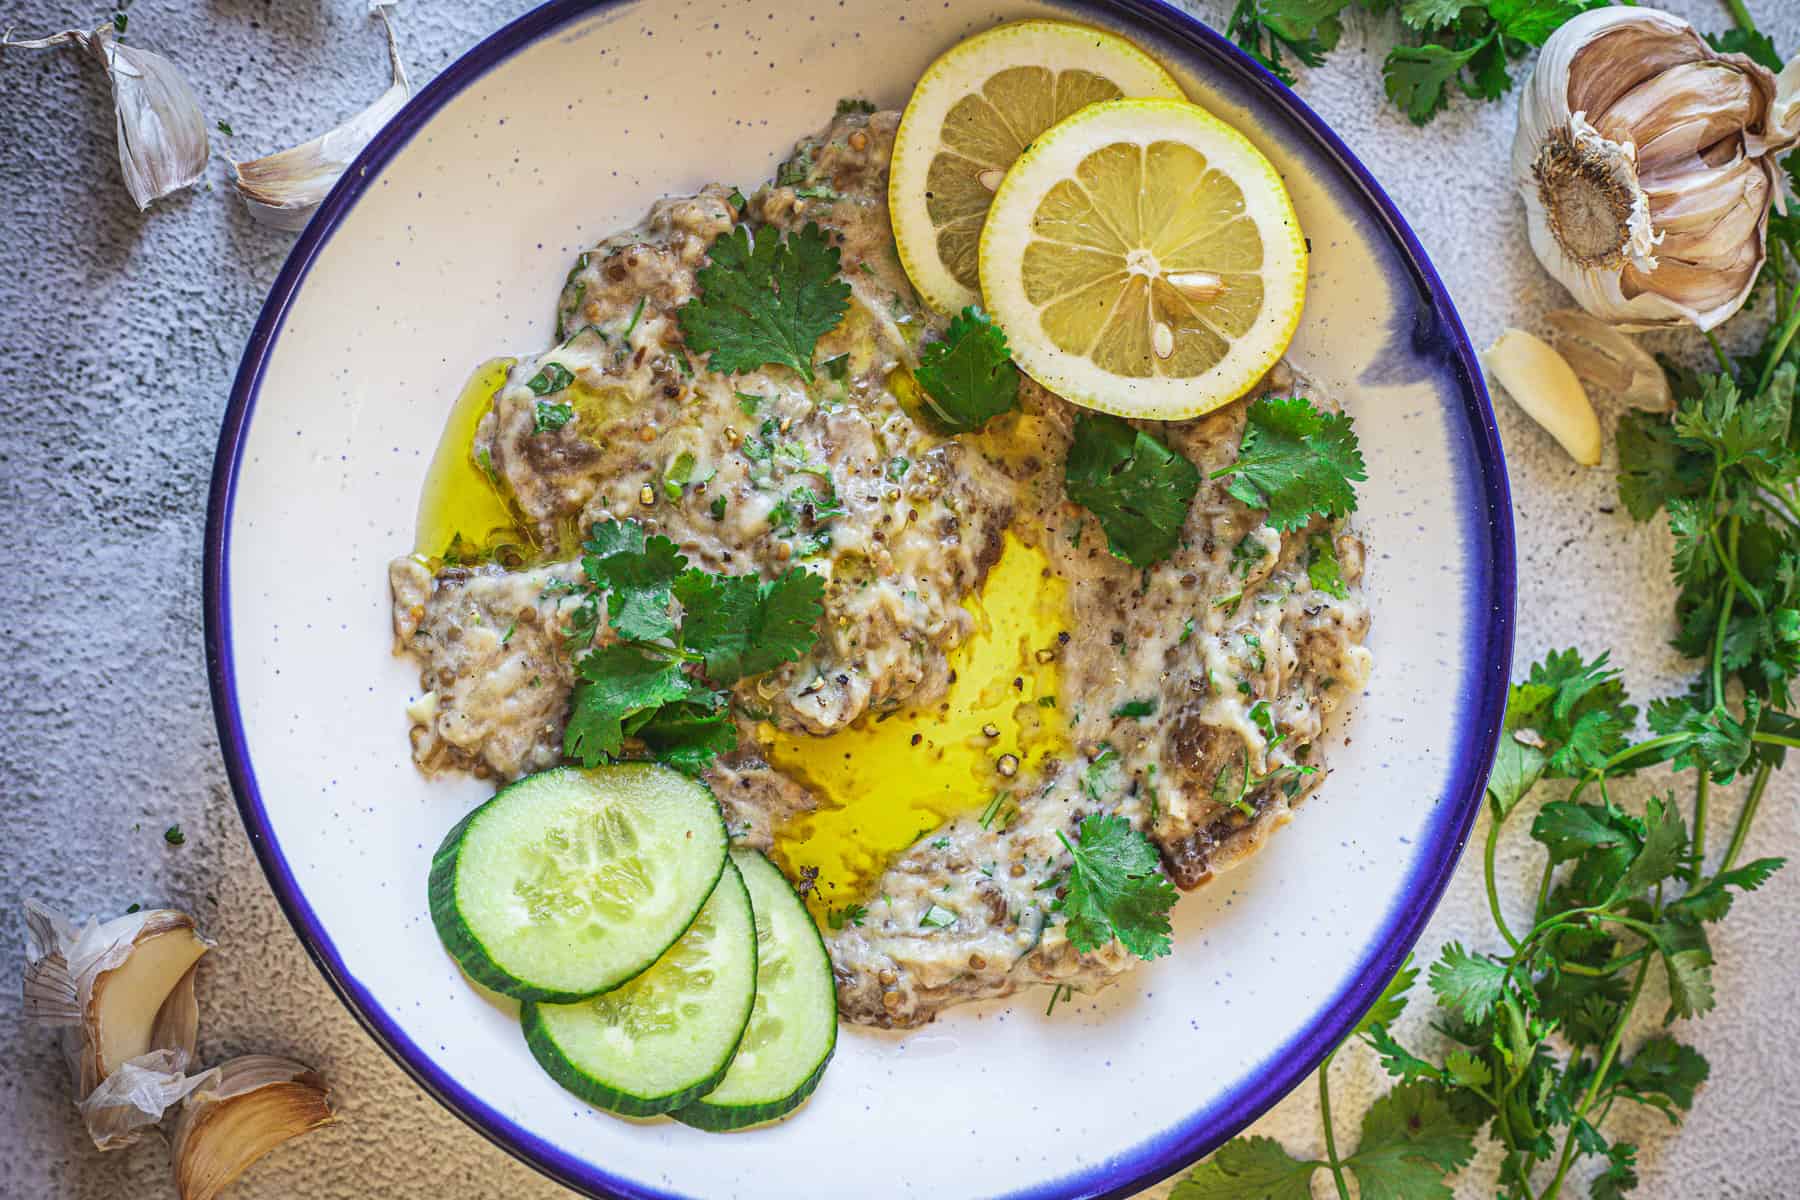 Baba ganoush on a plate with parsley and lemon.